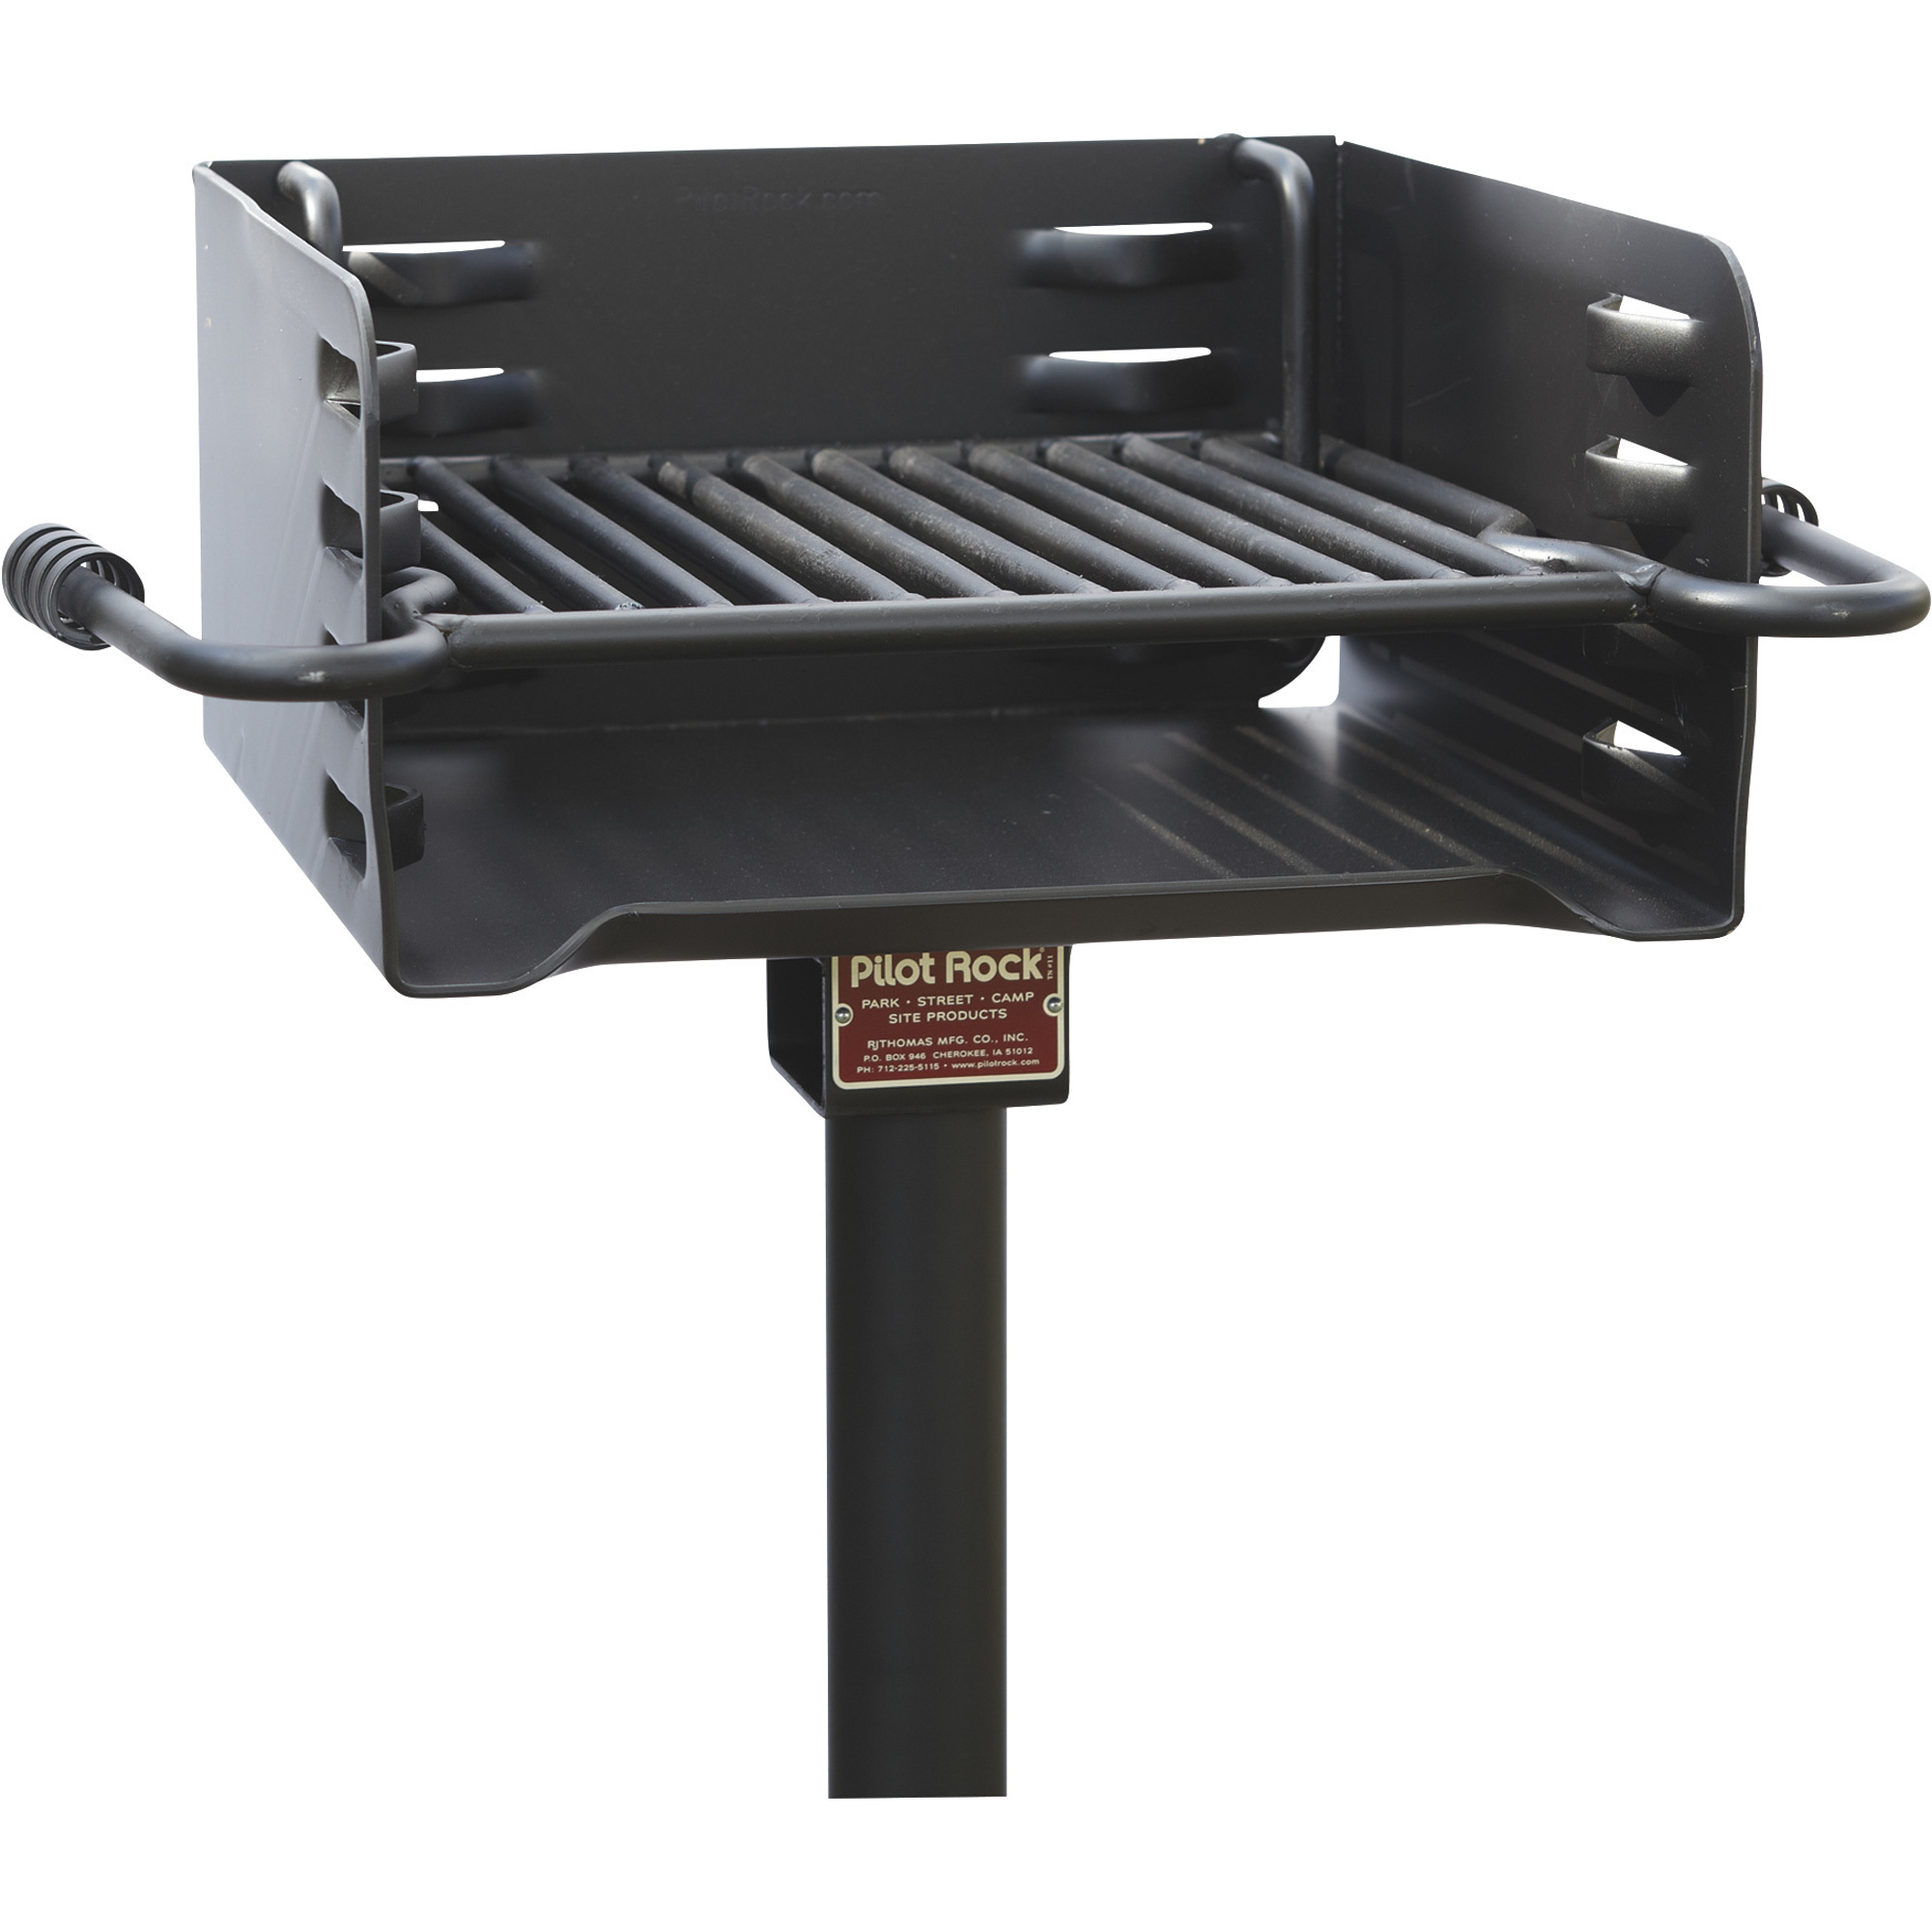 Pilot Rock Heavy-Duty Park-Style Charcoal Grill — 16in. x 16in., Model# H-16 B6X2 Northern Tool